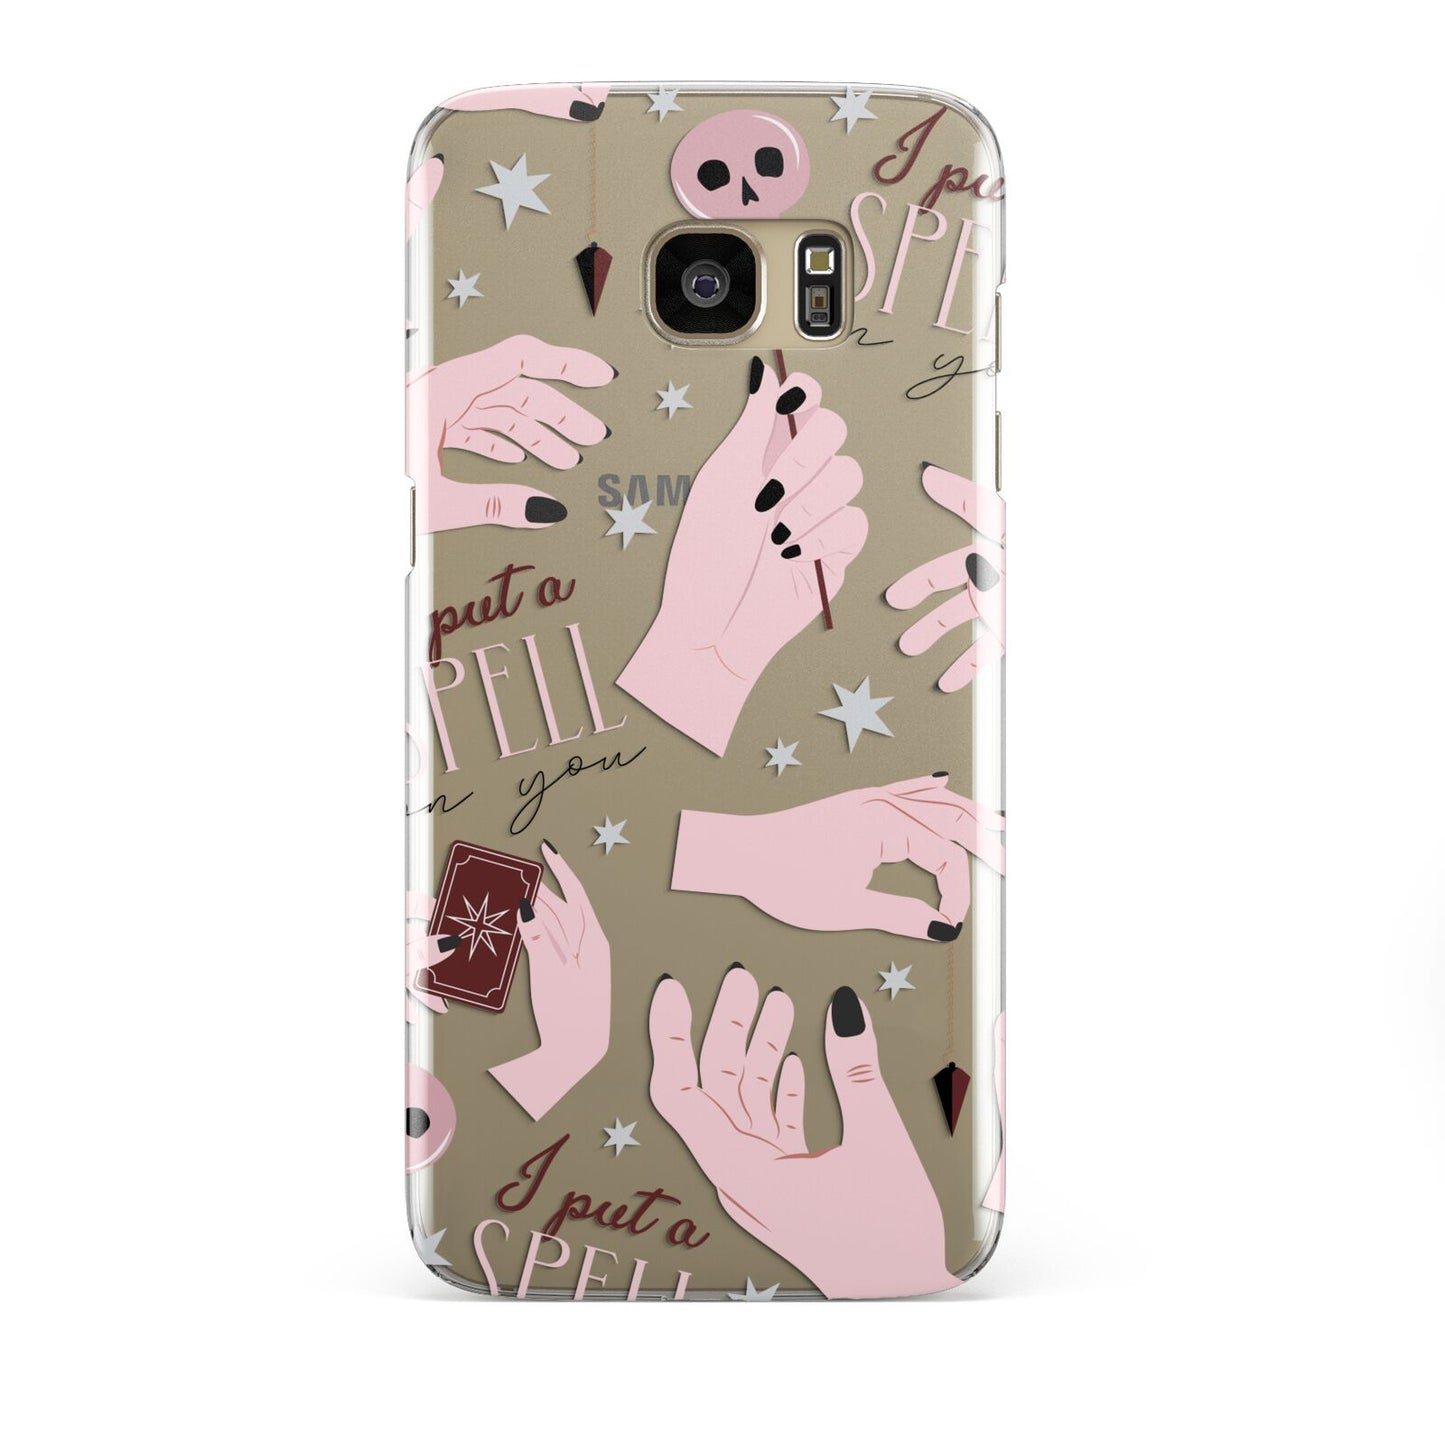 Witches Hands and Tarot Cards Samsung Galaxy S7 Edge Case